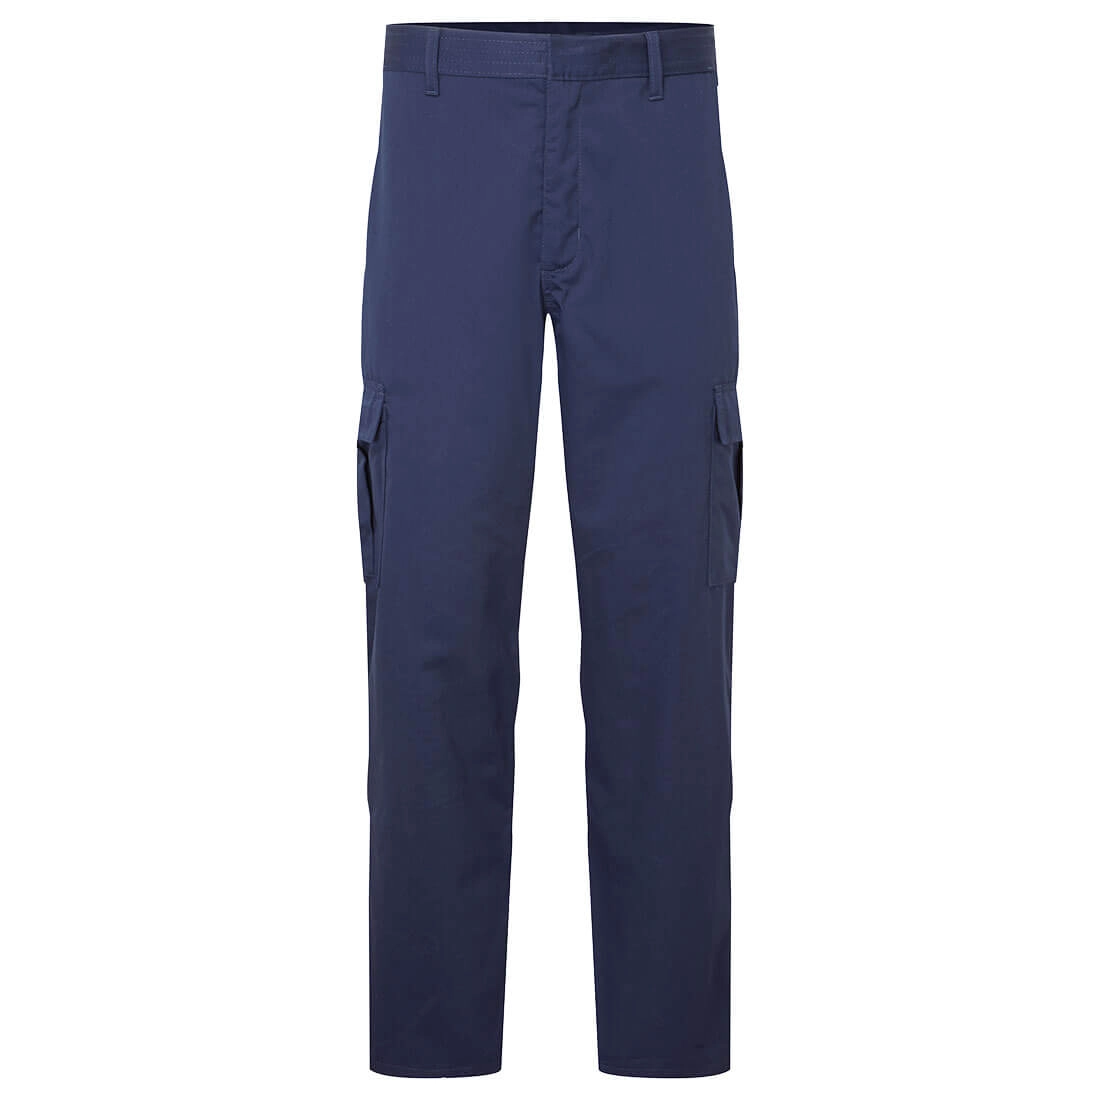 Women's Anti-Static ESD Trousers